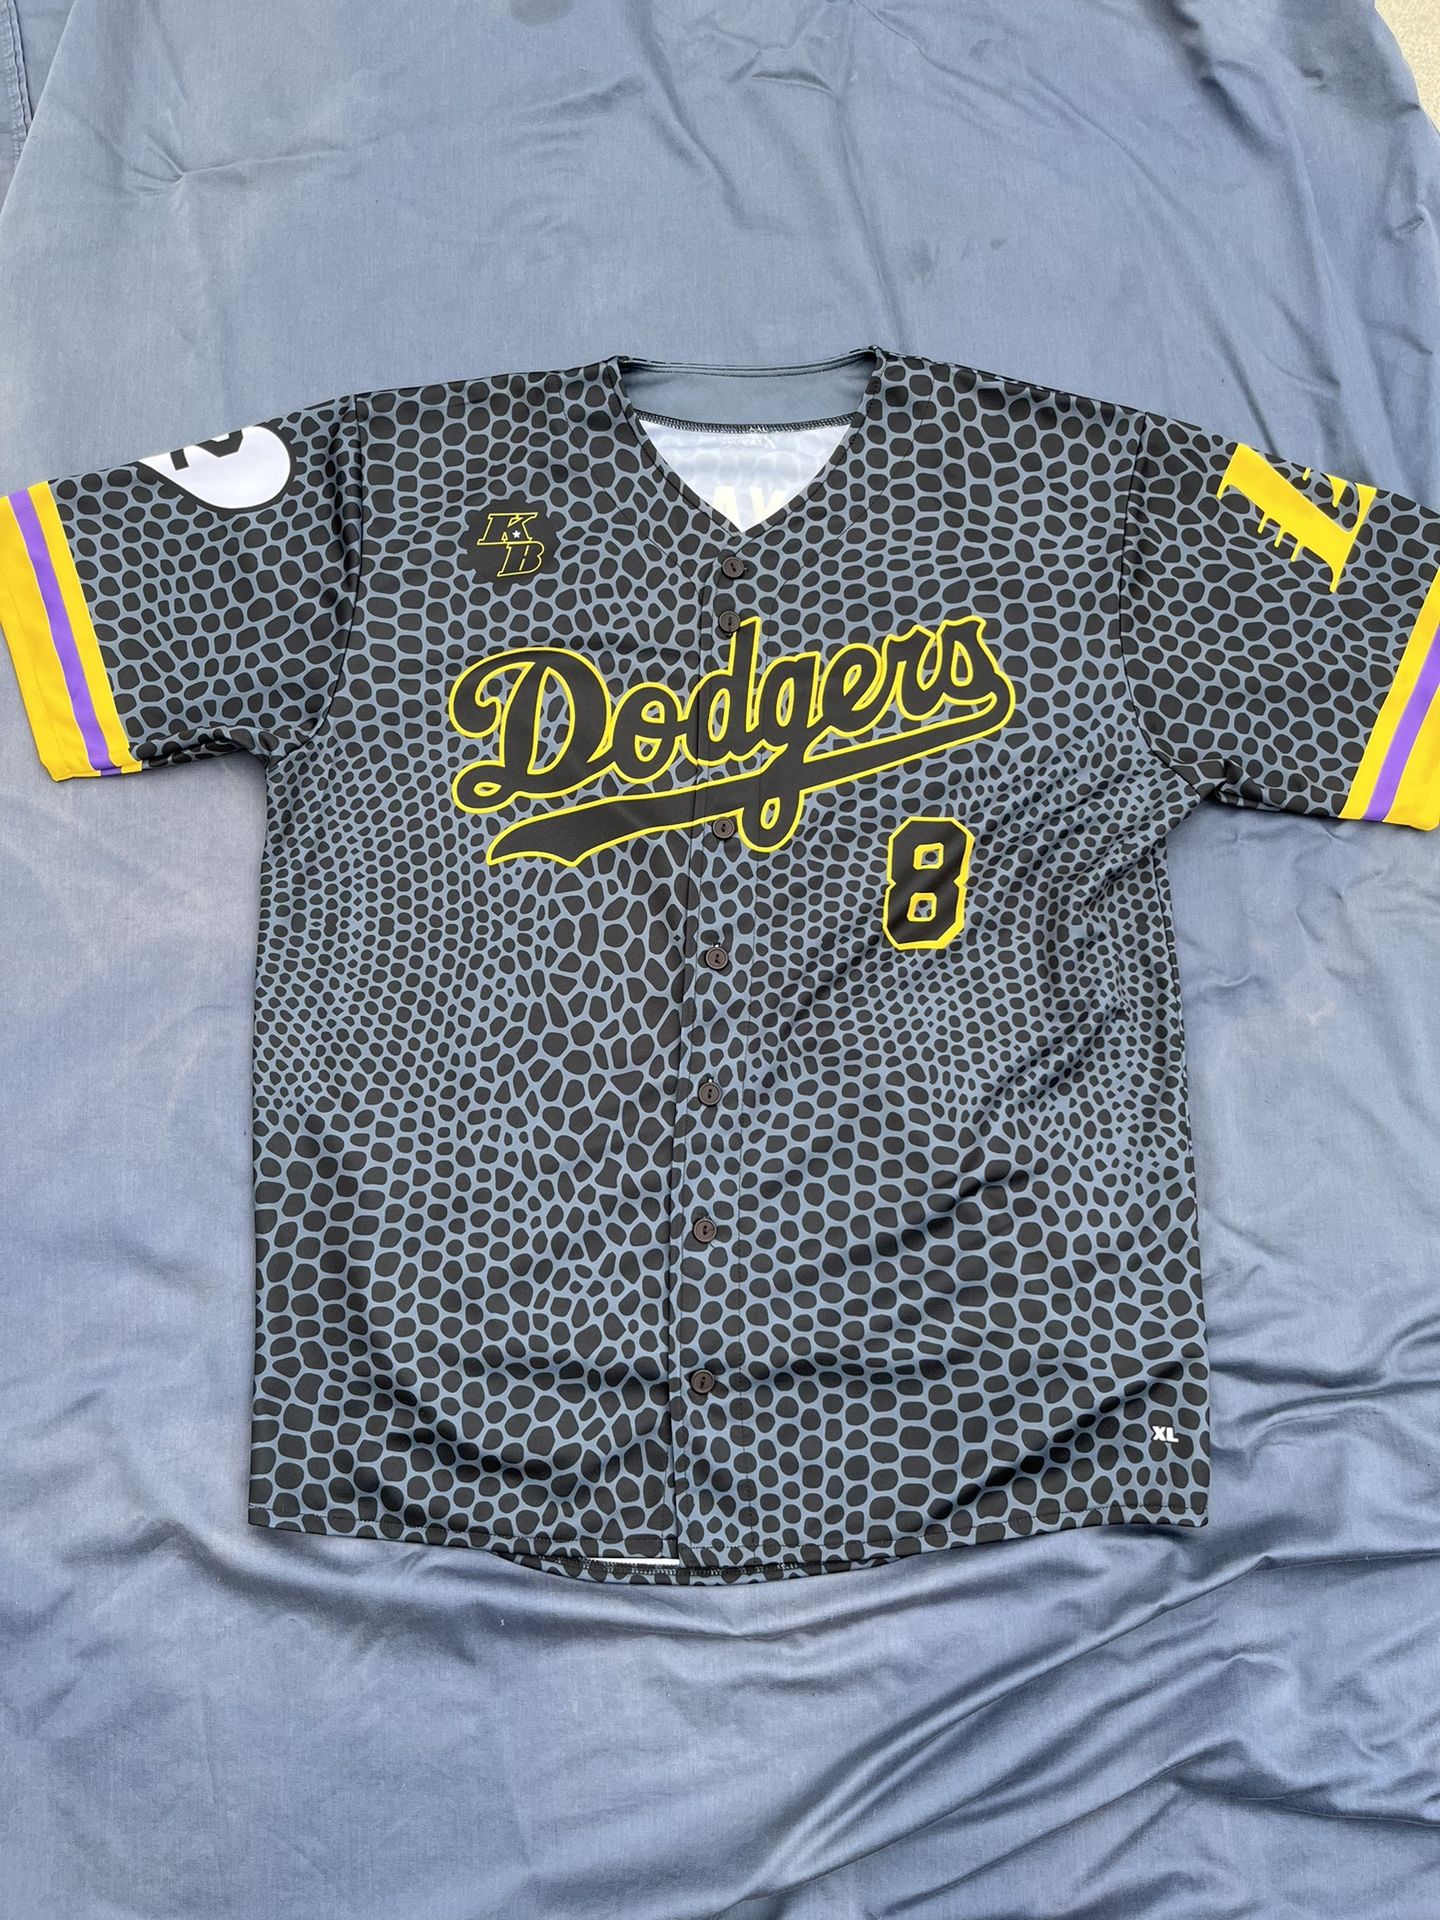 Kobe Bryant Dodger jersey for Sale in Los Angeles, CA - OfferUp